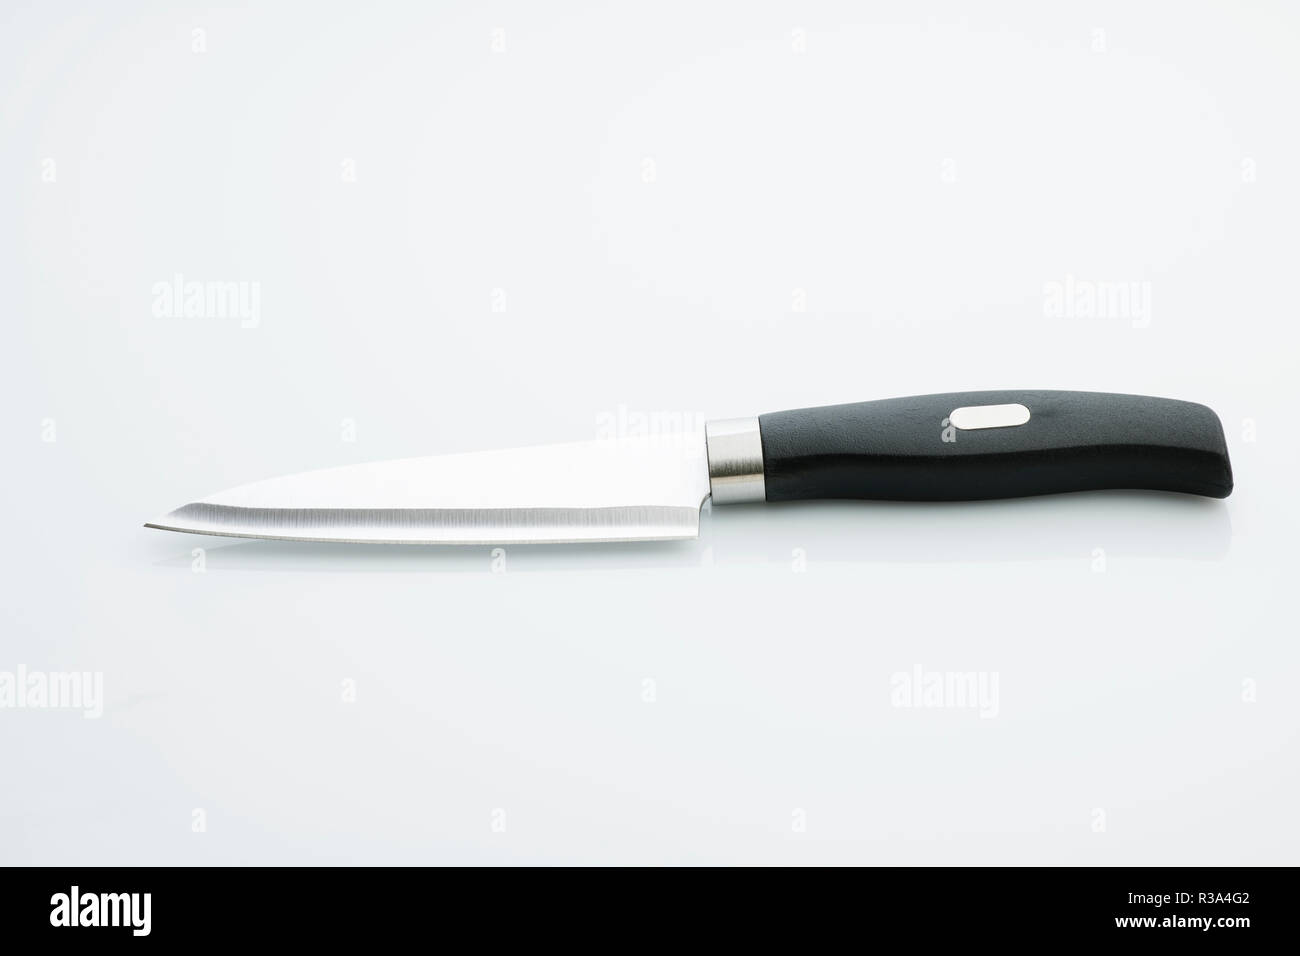 Kitchen: Top View of Kitchen Knife with Stainless Steel Blade on White Background Stock Photo